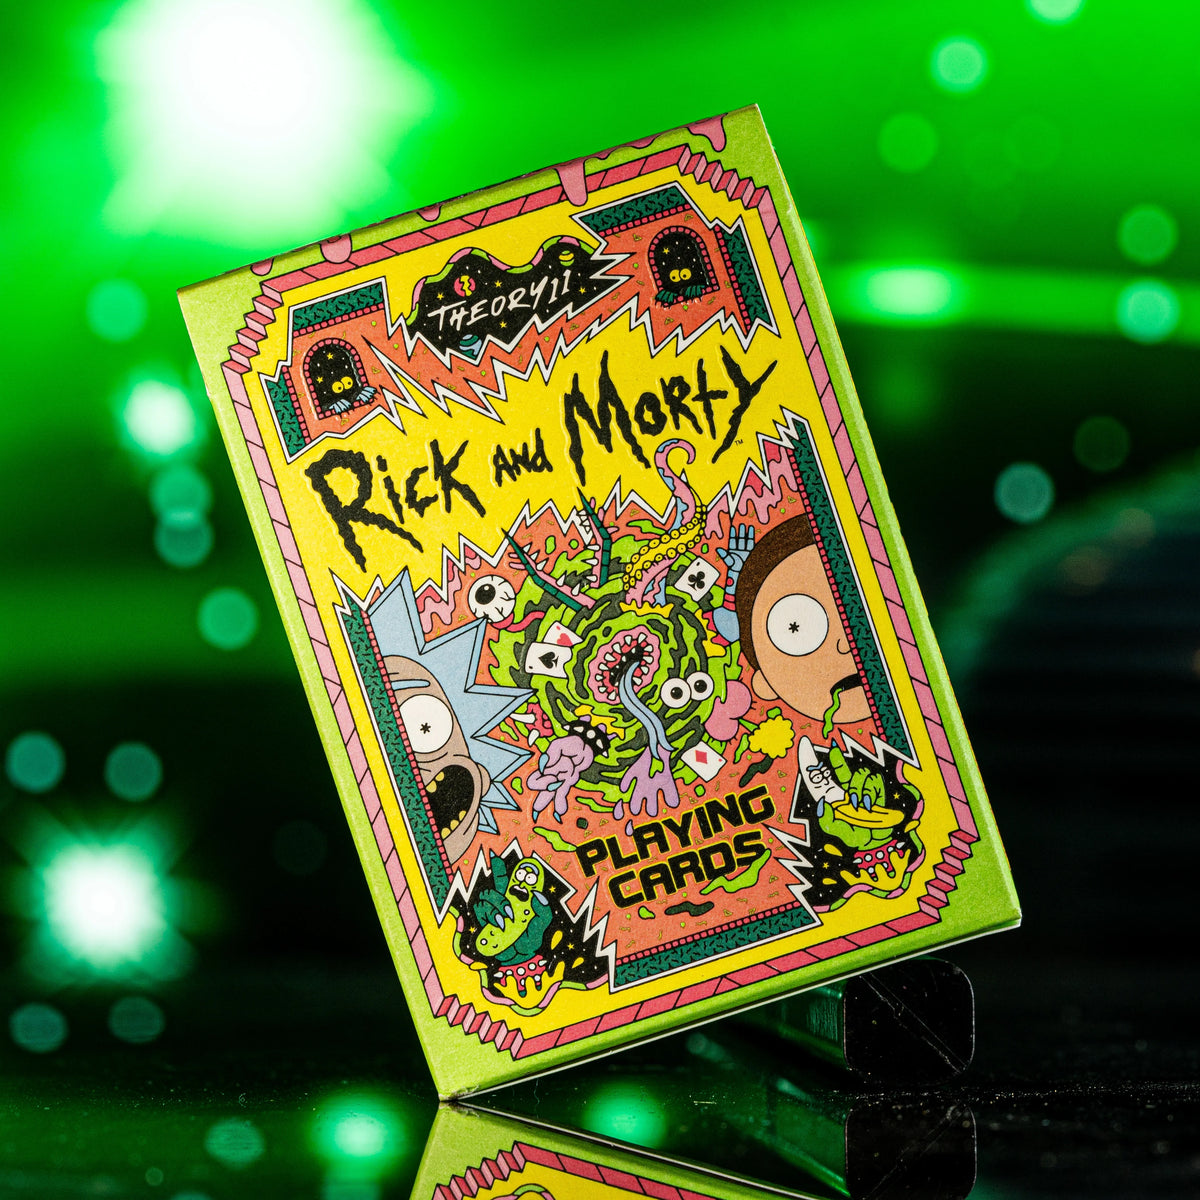 Theory 11 - Rick and Morty Playing Cards